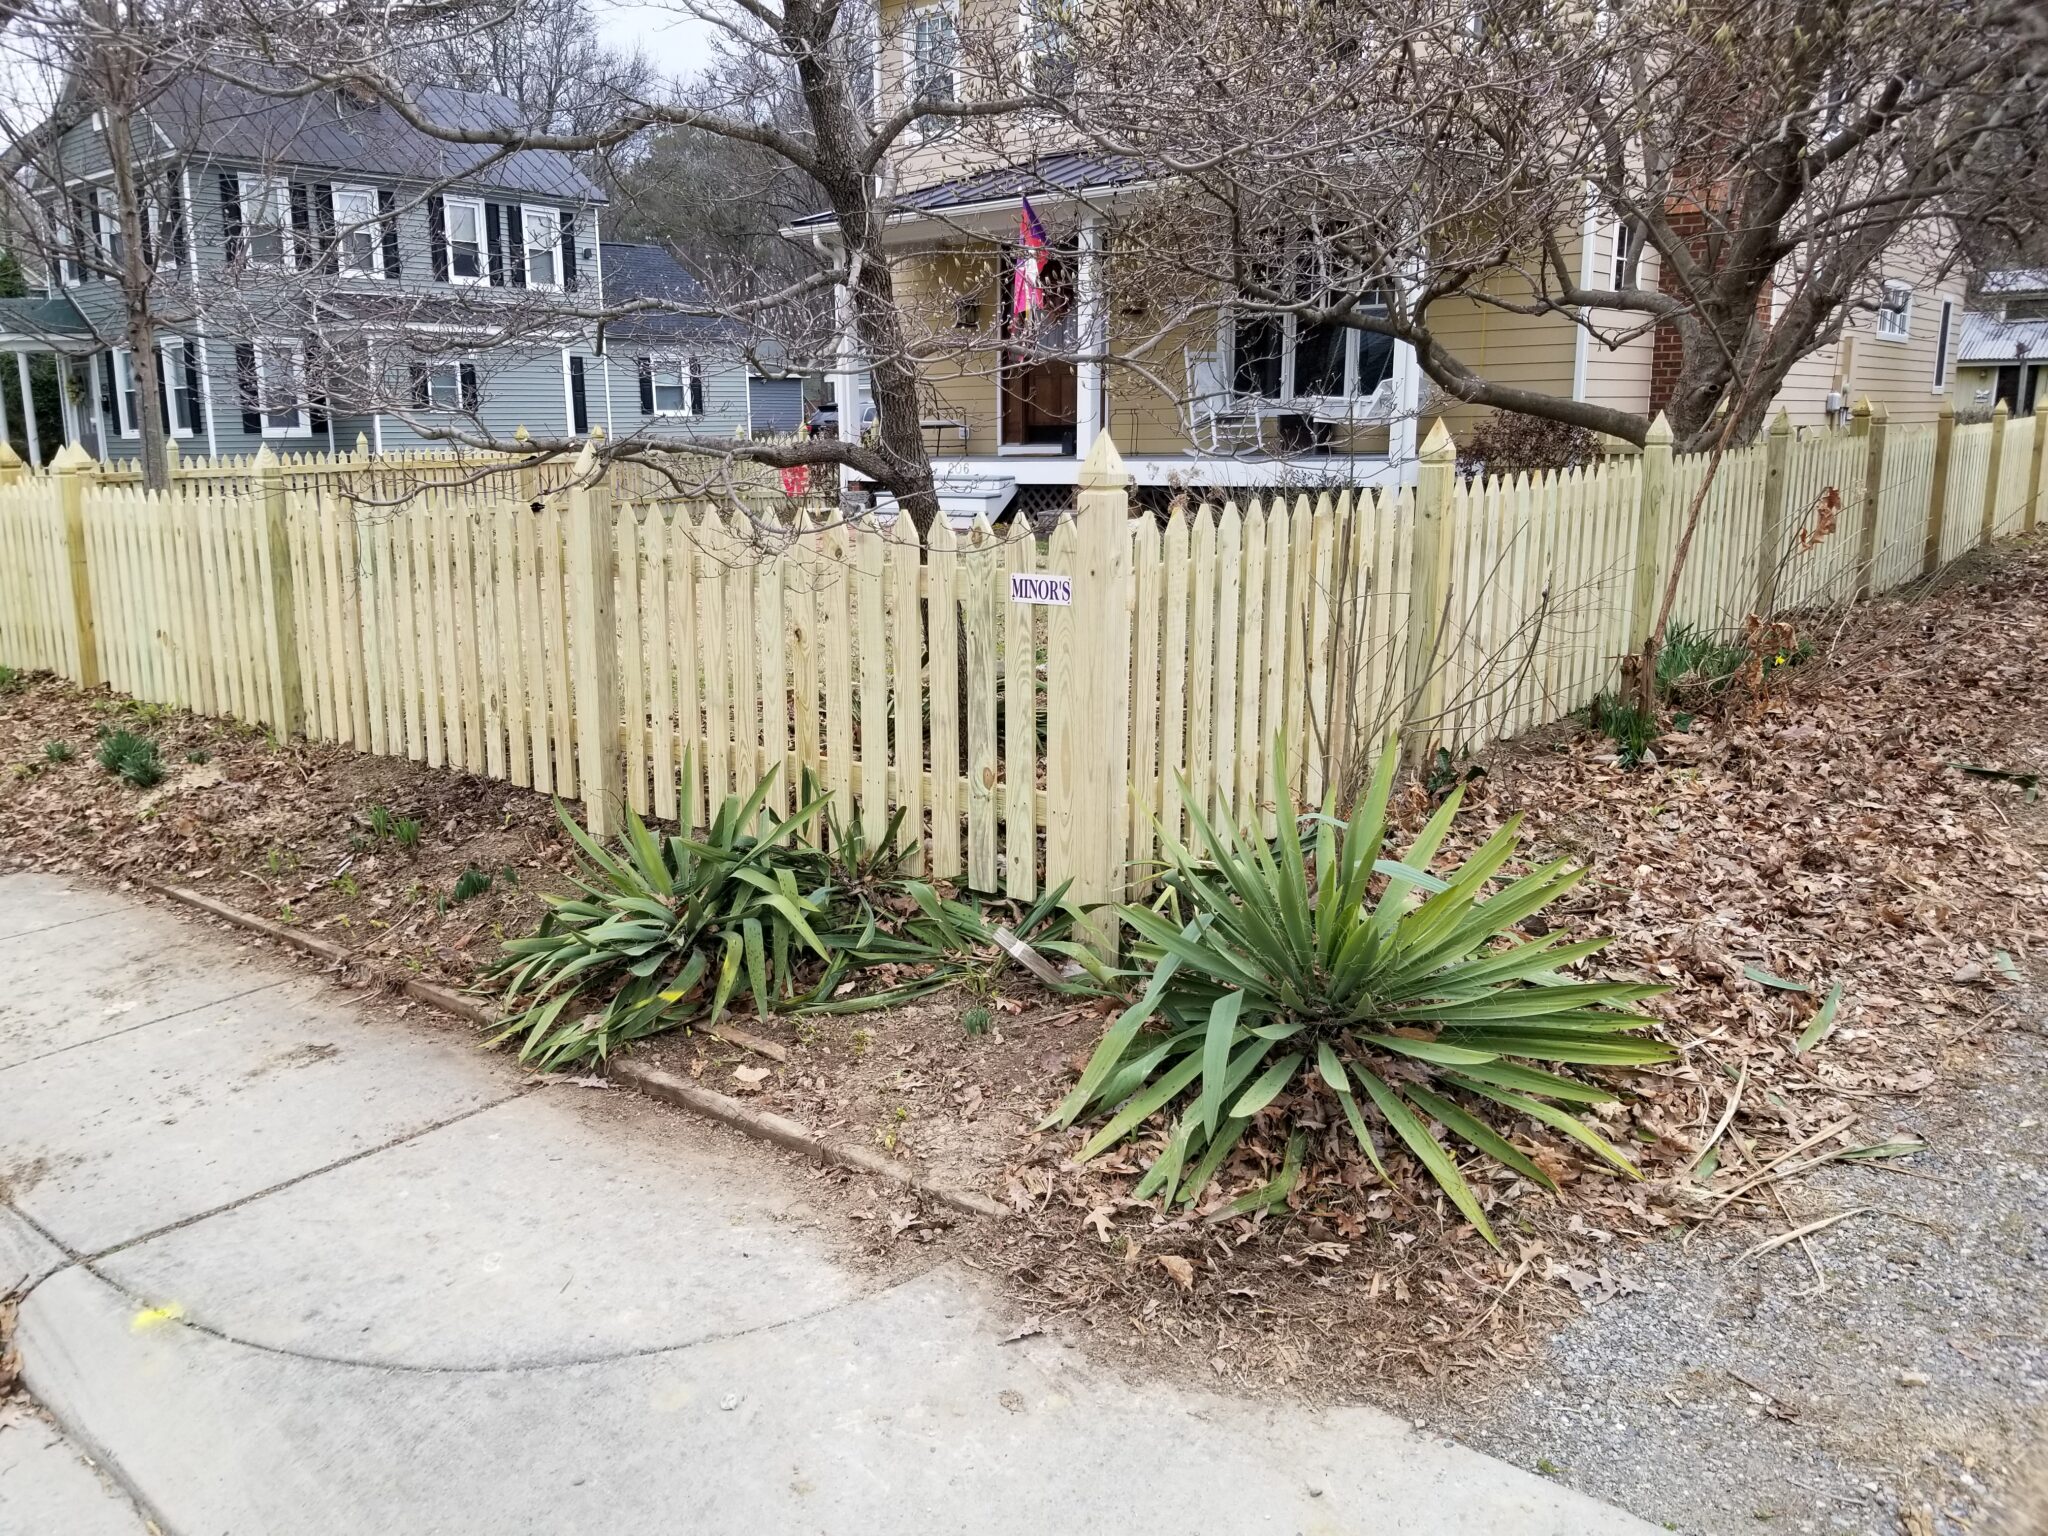 Pointed picket fencing on exposed williamsburg posts